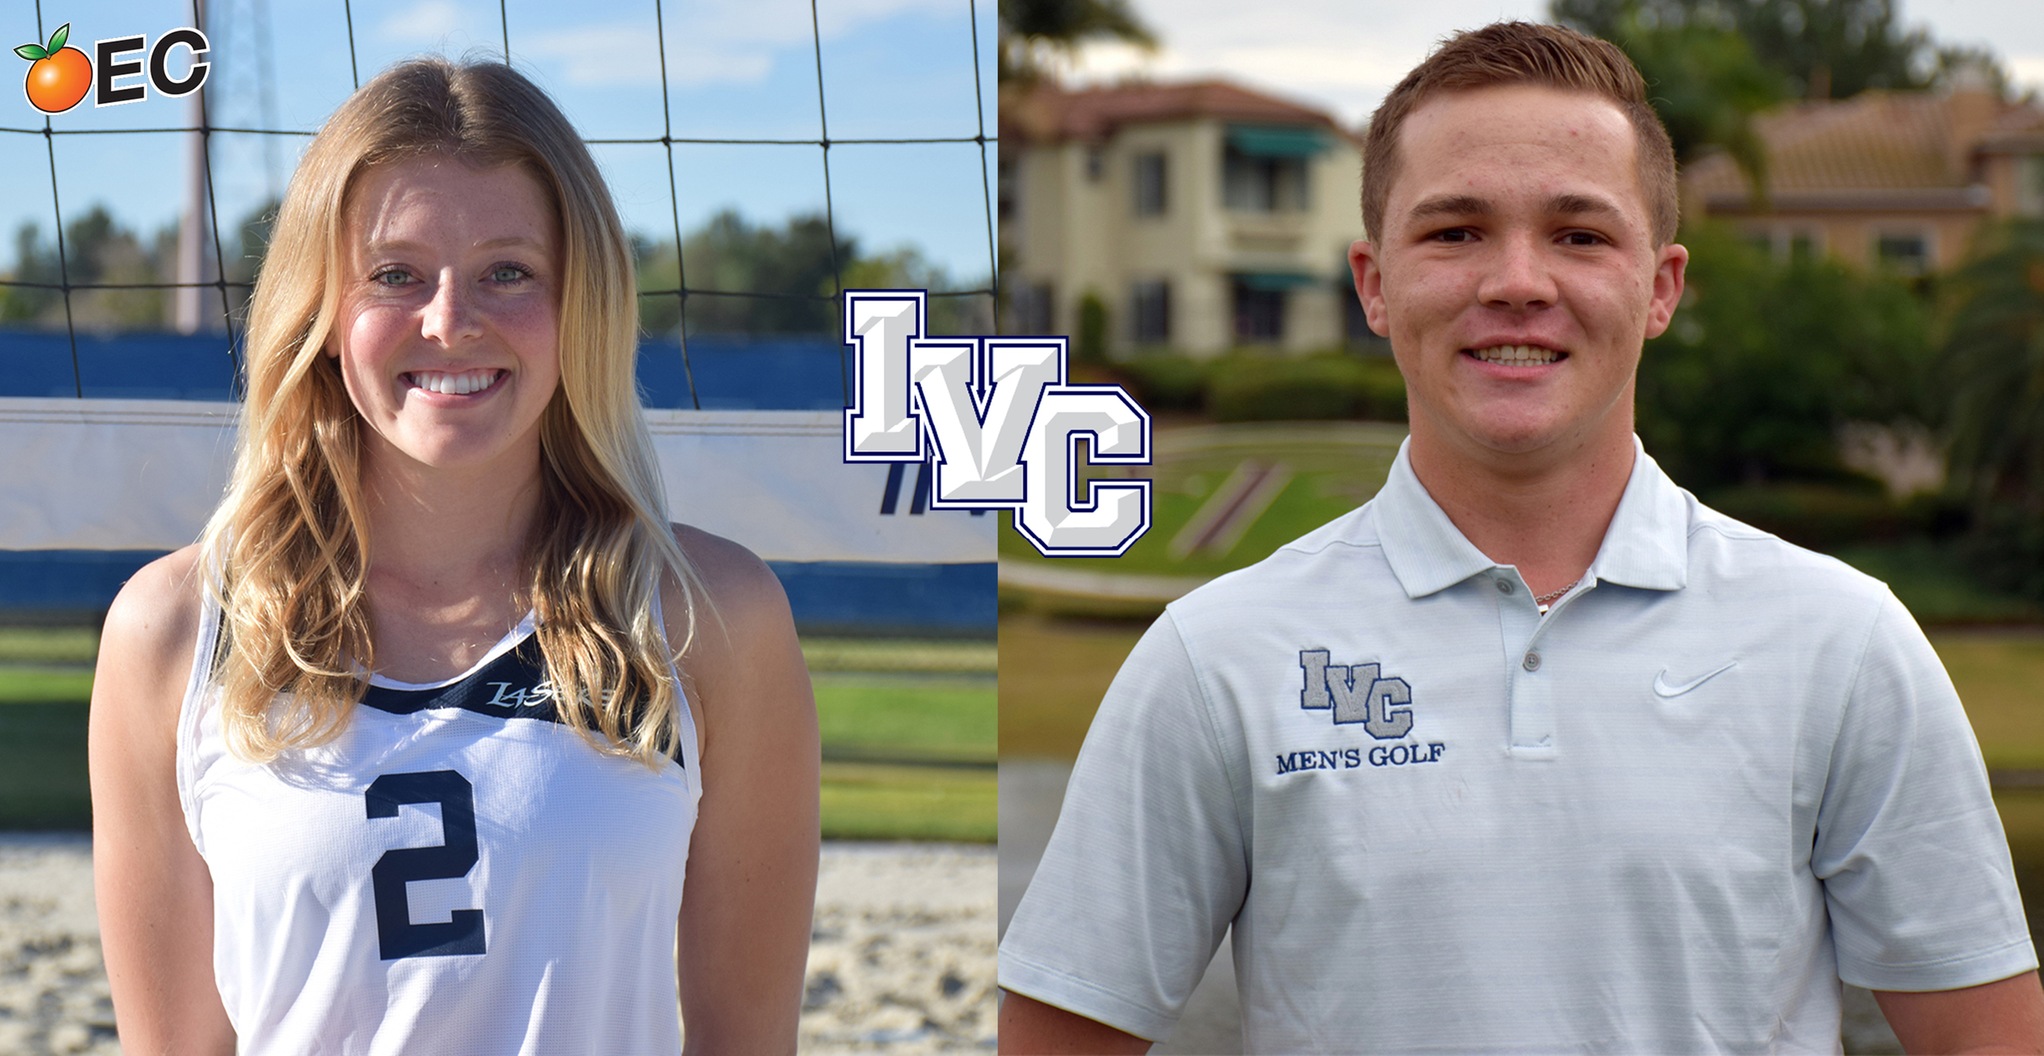 Unke and Humble selected as IVC's Character Champion winners